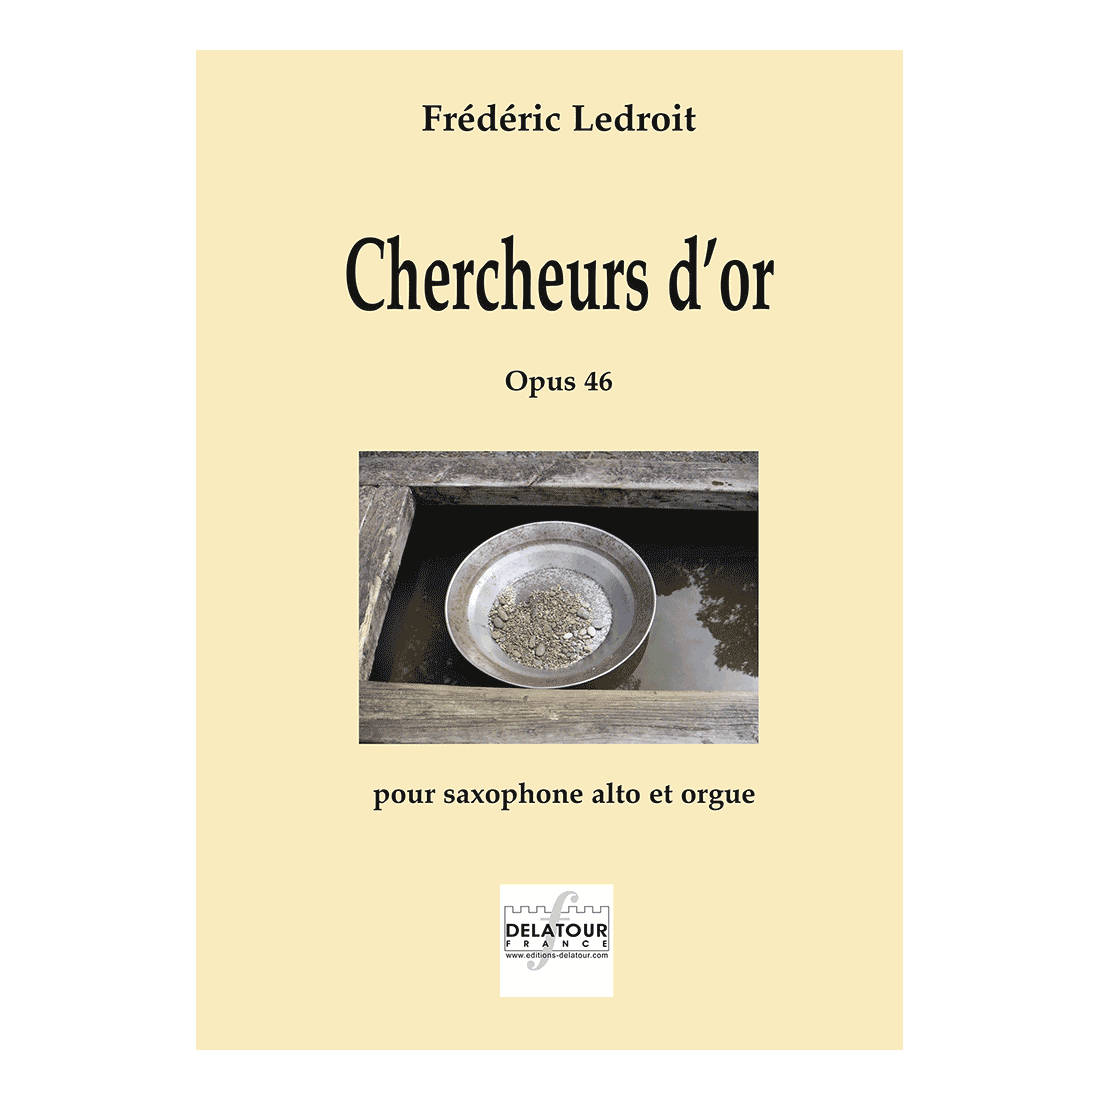 Chercheurs d'or for saxophone and organ